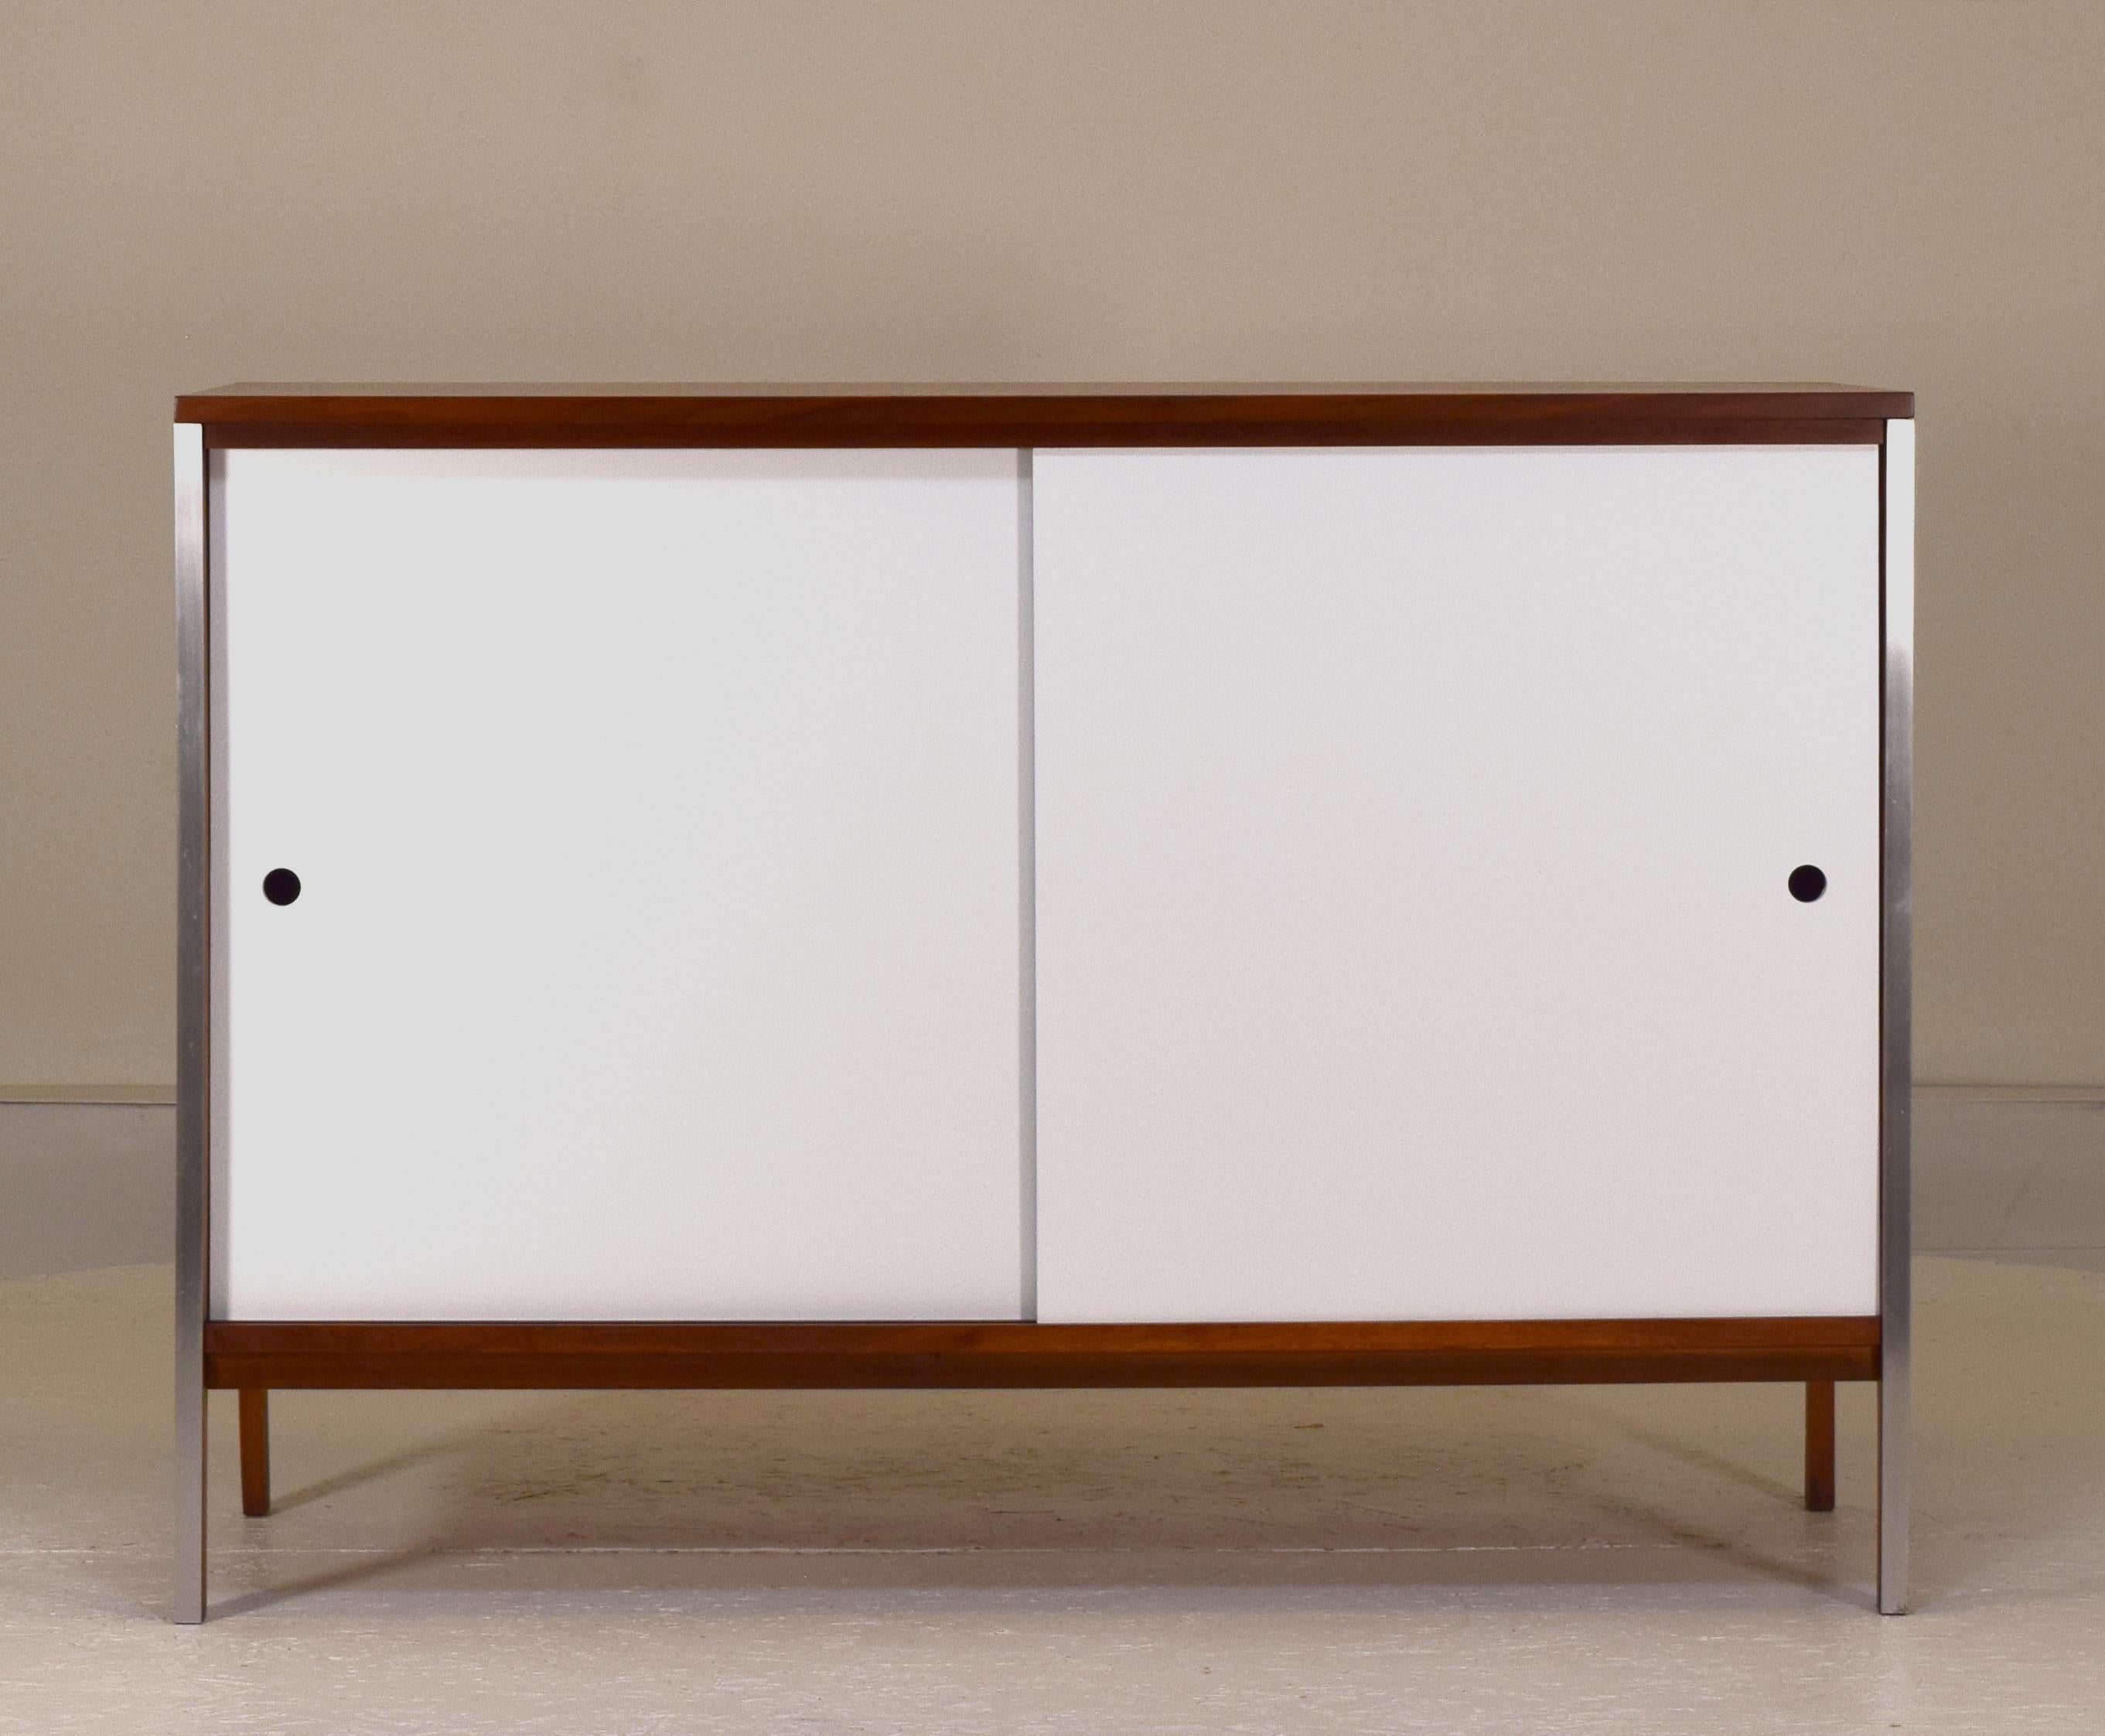 Paul McCobb, Linear series, Calvin, circa 1950's. Ideal as a cabinet for media storage or buffet due to the height. Measures: 48